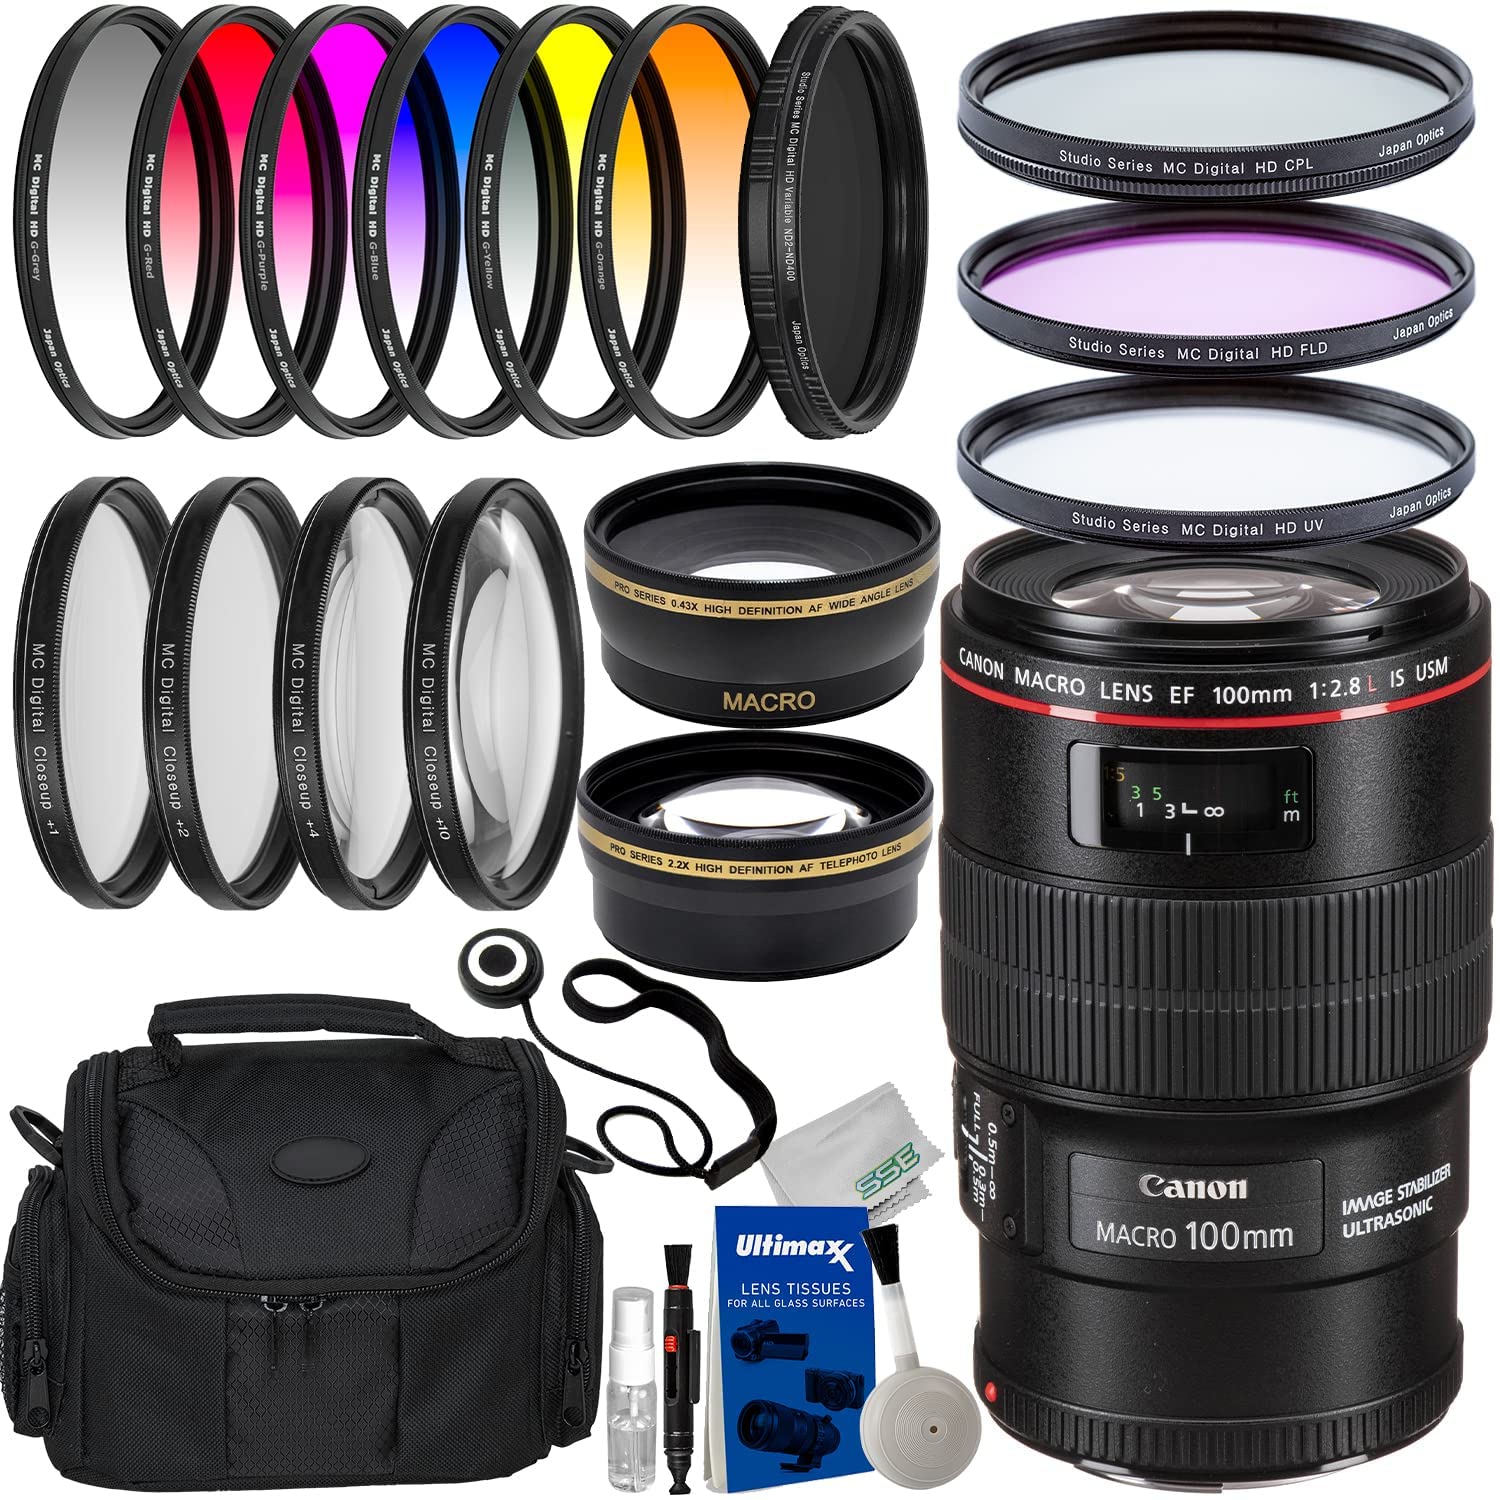 Canon EF 100mm f/2.8L Macro is USM Lens with Deluxe Accessory Bundle: Water Resistant Gadget Bag, Variable Neutral Density Filter (ND2 - ND400), 6PC Gradual Color Filter Kit & Much More